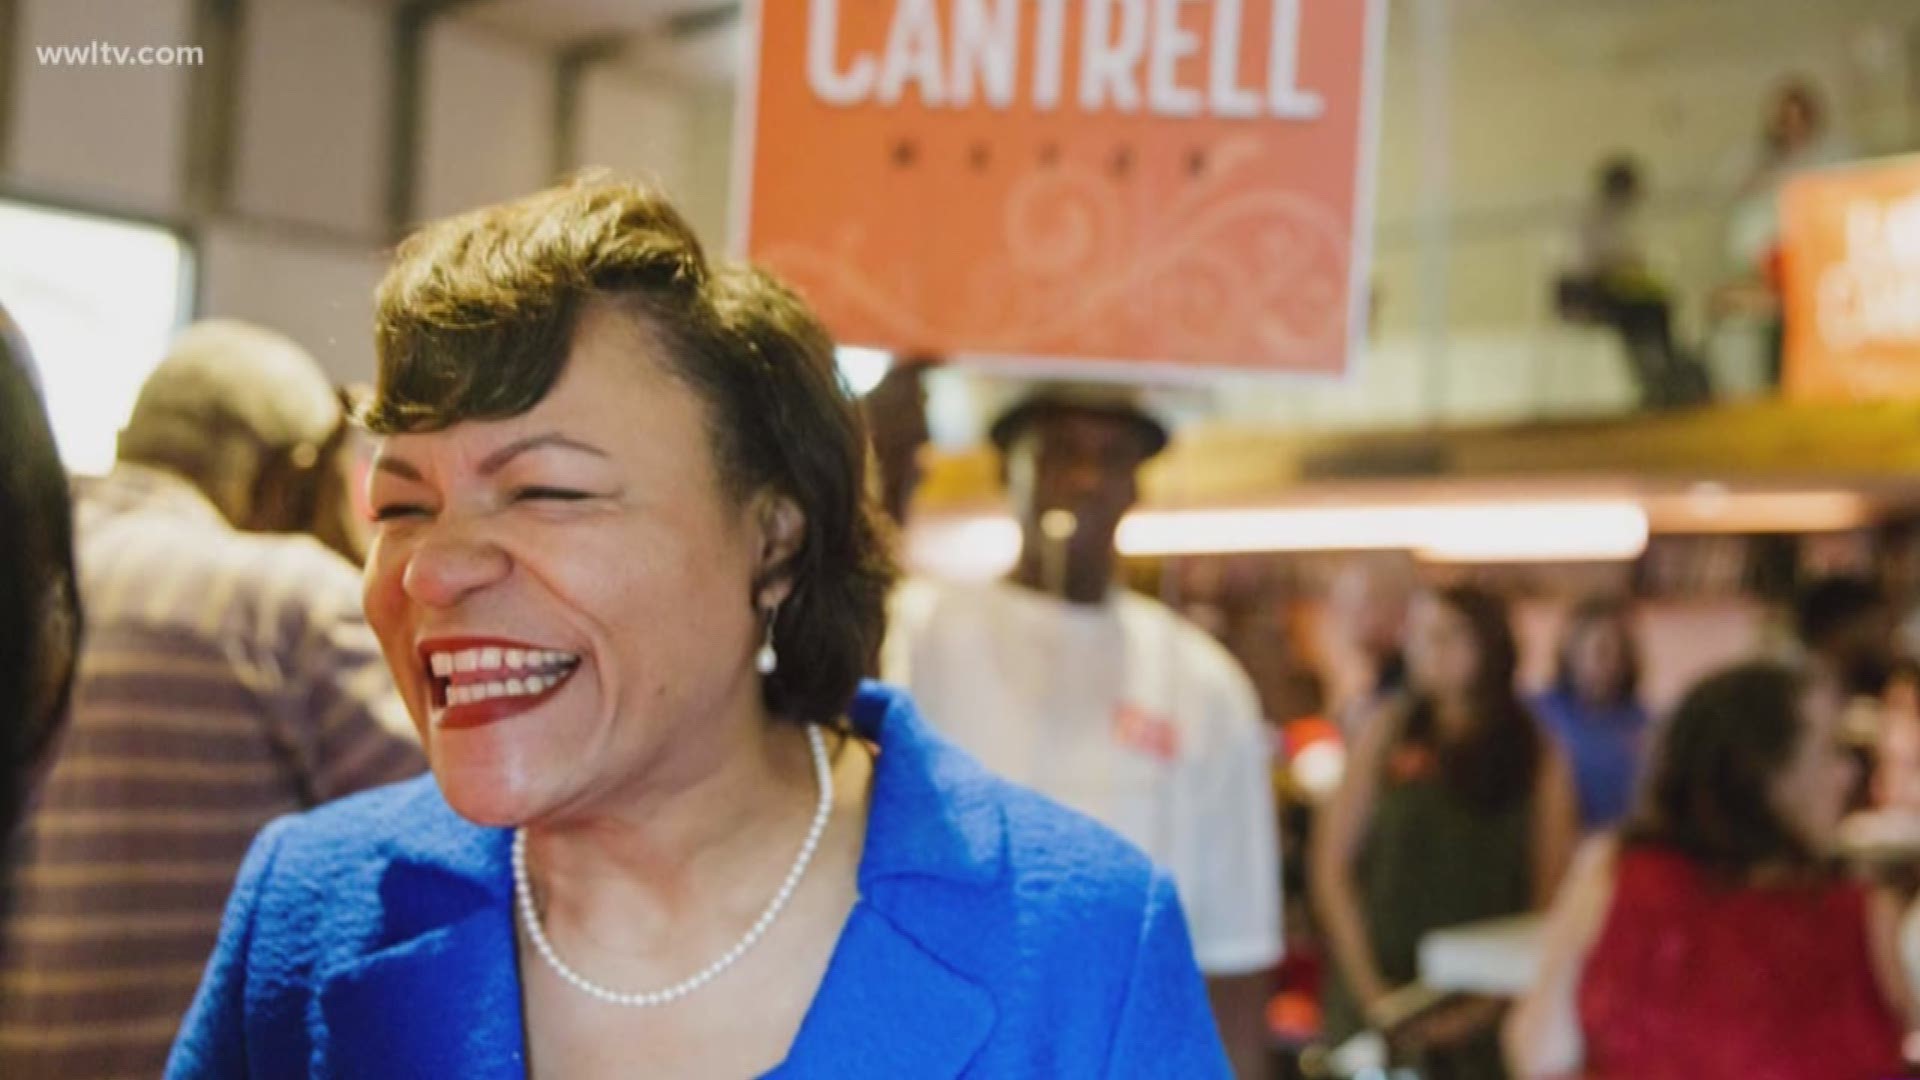 More questions emerged Friday about whether mayoral candidate LaToya Cantrell ran afoul of city policies or state ethics laws when she used her credit card for almost $9,000 in purchases that she or her campaign later reimbursed.